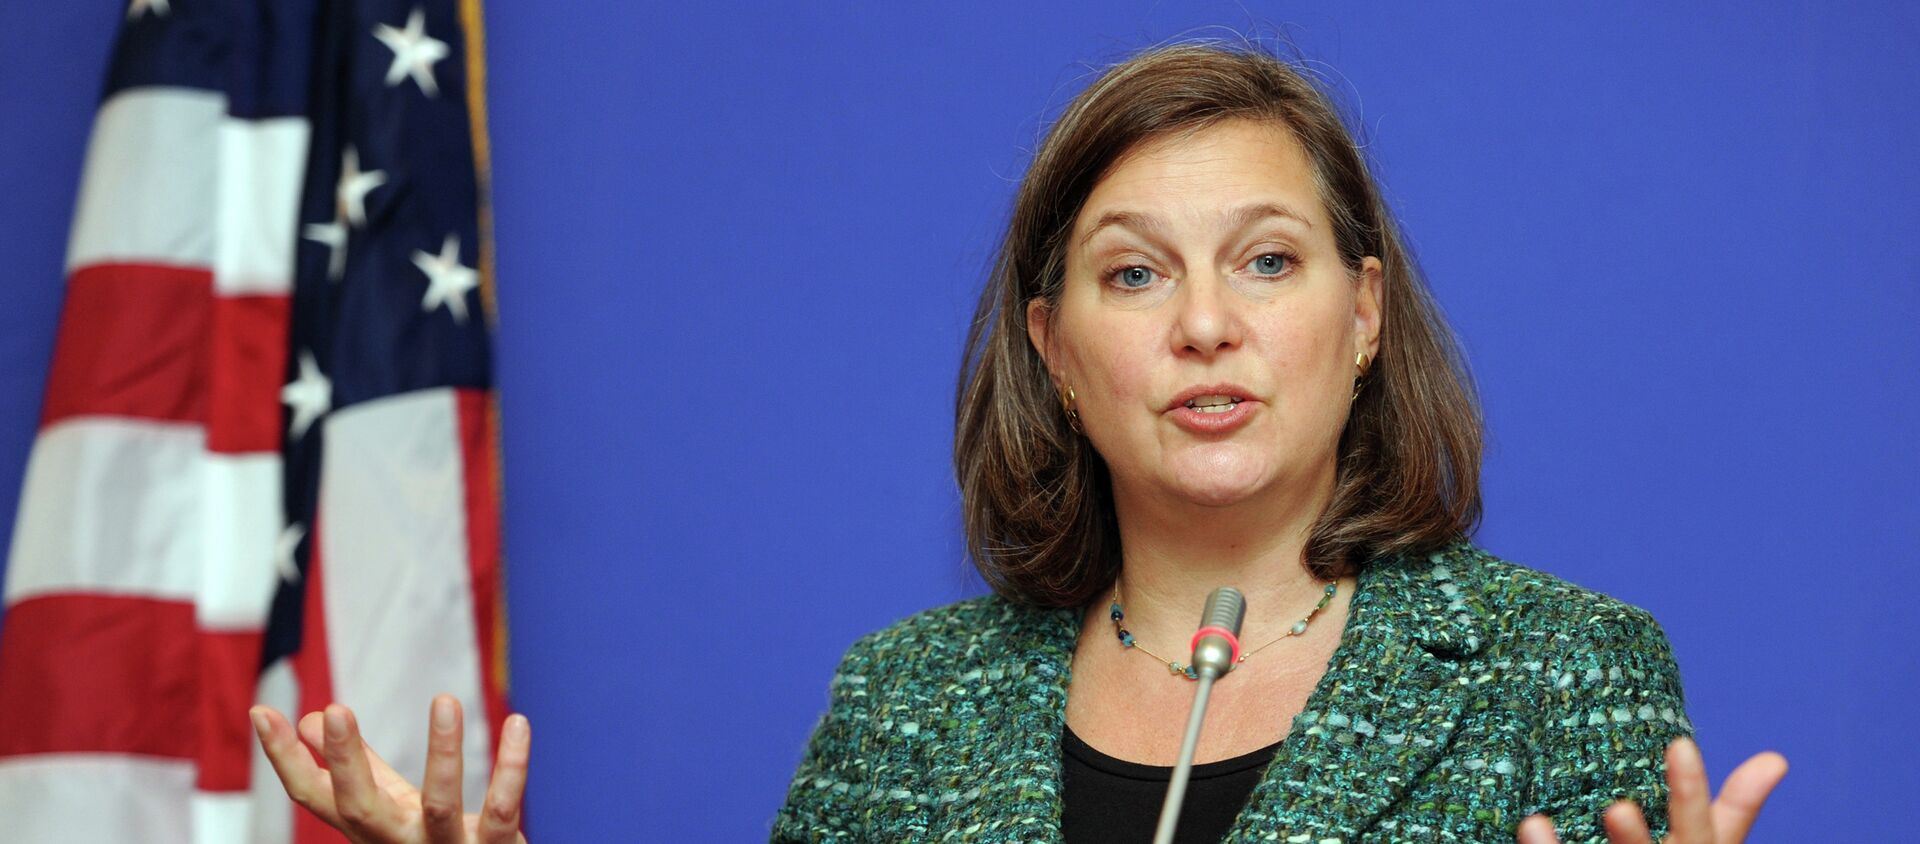 US Assistant Secretary of State for European and Eurasian Affairs Victoria Nuland gestures as she speaks during her press conference in Tbilisi - Sputnik International, 1920, 27.01.2017